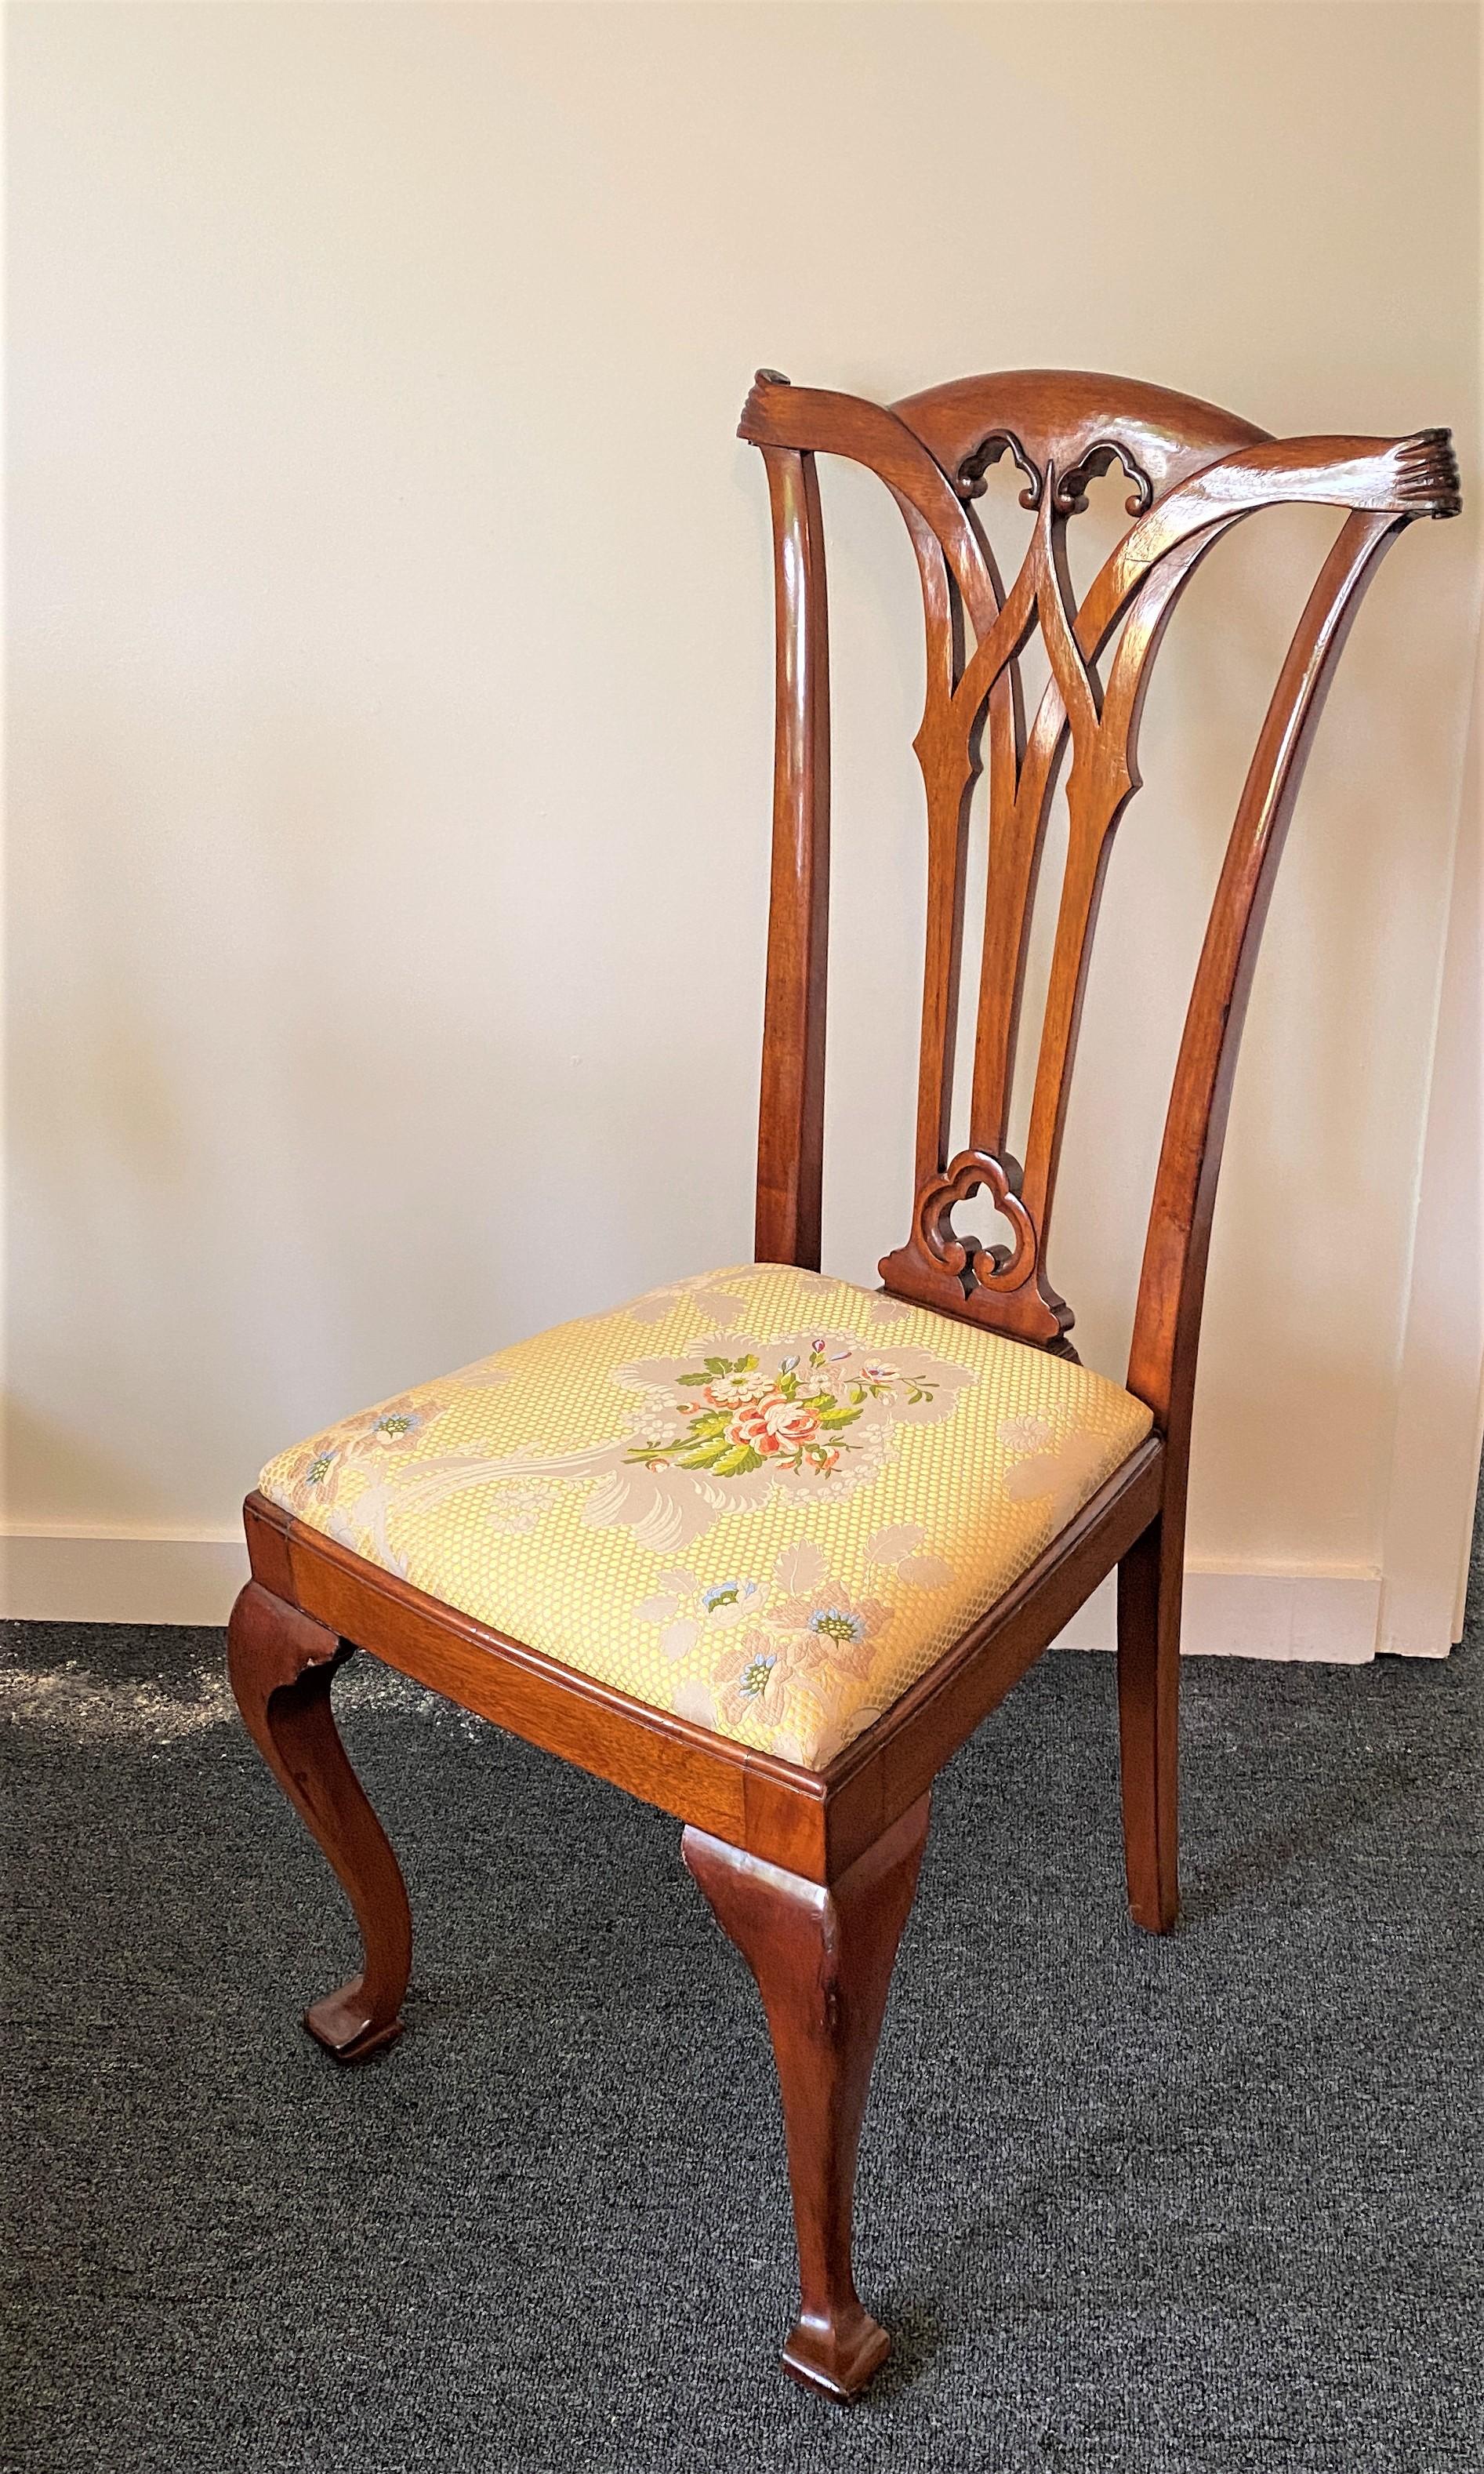 Antique Edwardian side chair Mahogany Chippendale Gothic Queen Anne details Yellow flowered upholstery Desk Chair - from a Palm Beach estate.

This was used as an elegant desk chair, but it matches the 10-chair dining set listed elsewhere on